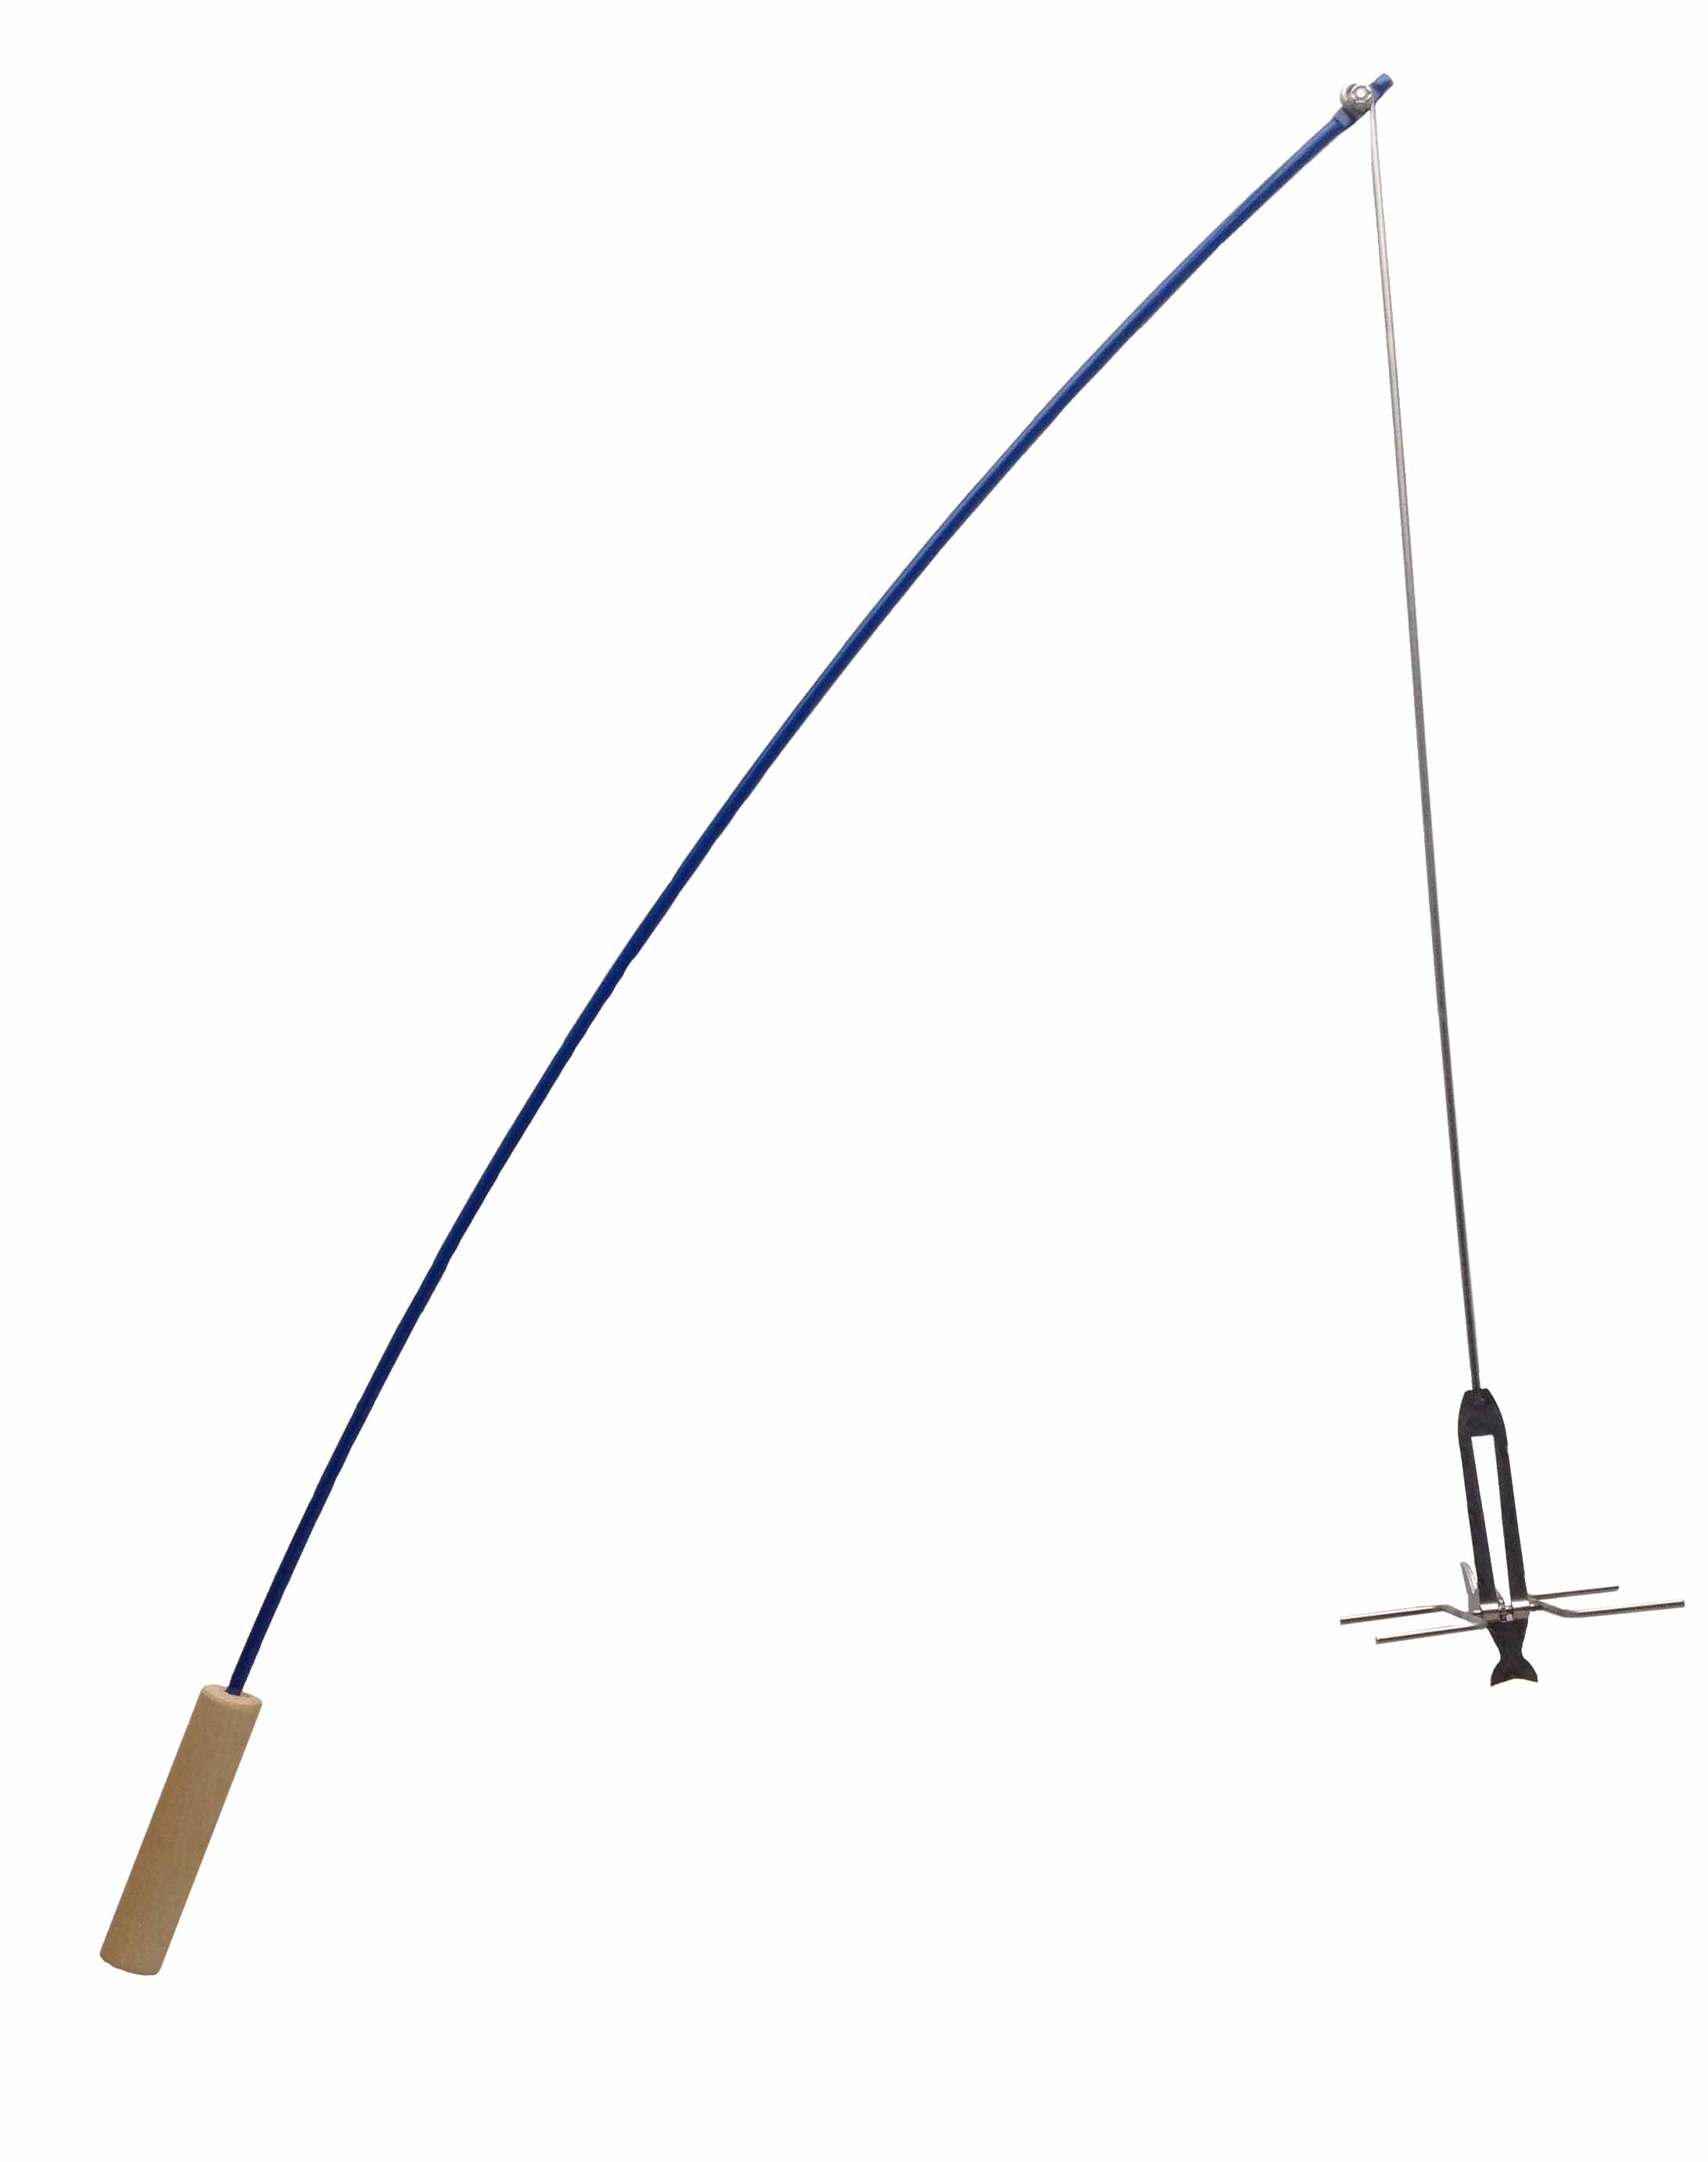 Fishing Poles Pictures - Cliparts.co